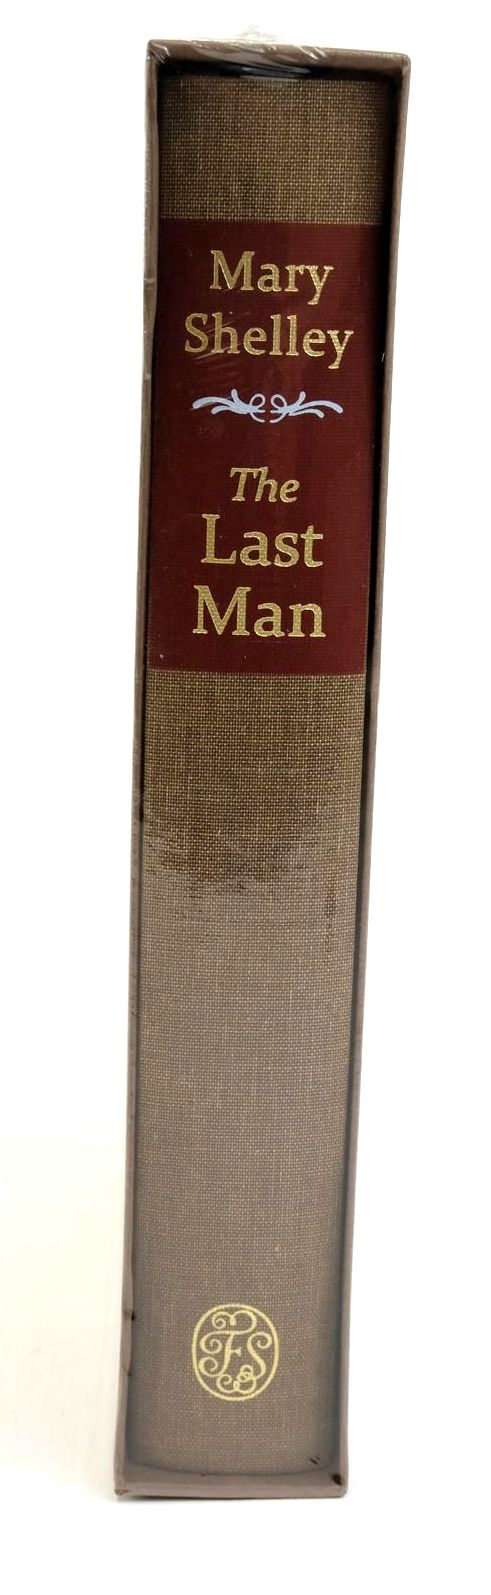 Photo of THE LAST MAN written by Shelley, Mary
Hall, Sarah illustrated by Friedrich, Caspar David published by Folio Society (STOCK CODE: 1321936)  for sale by Stella & Rose's Books